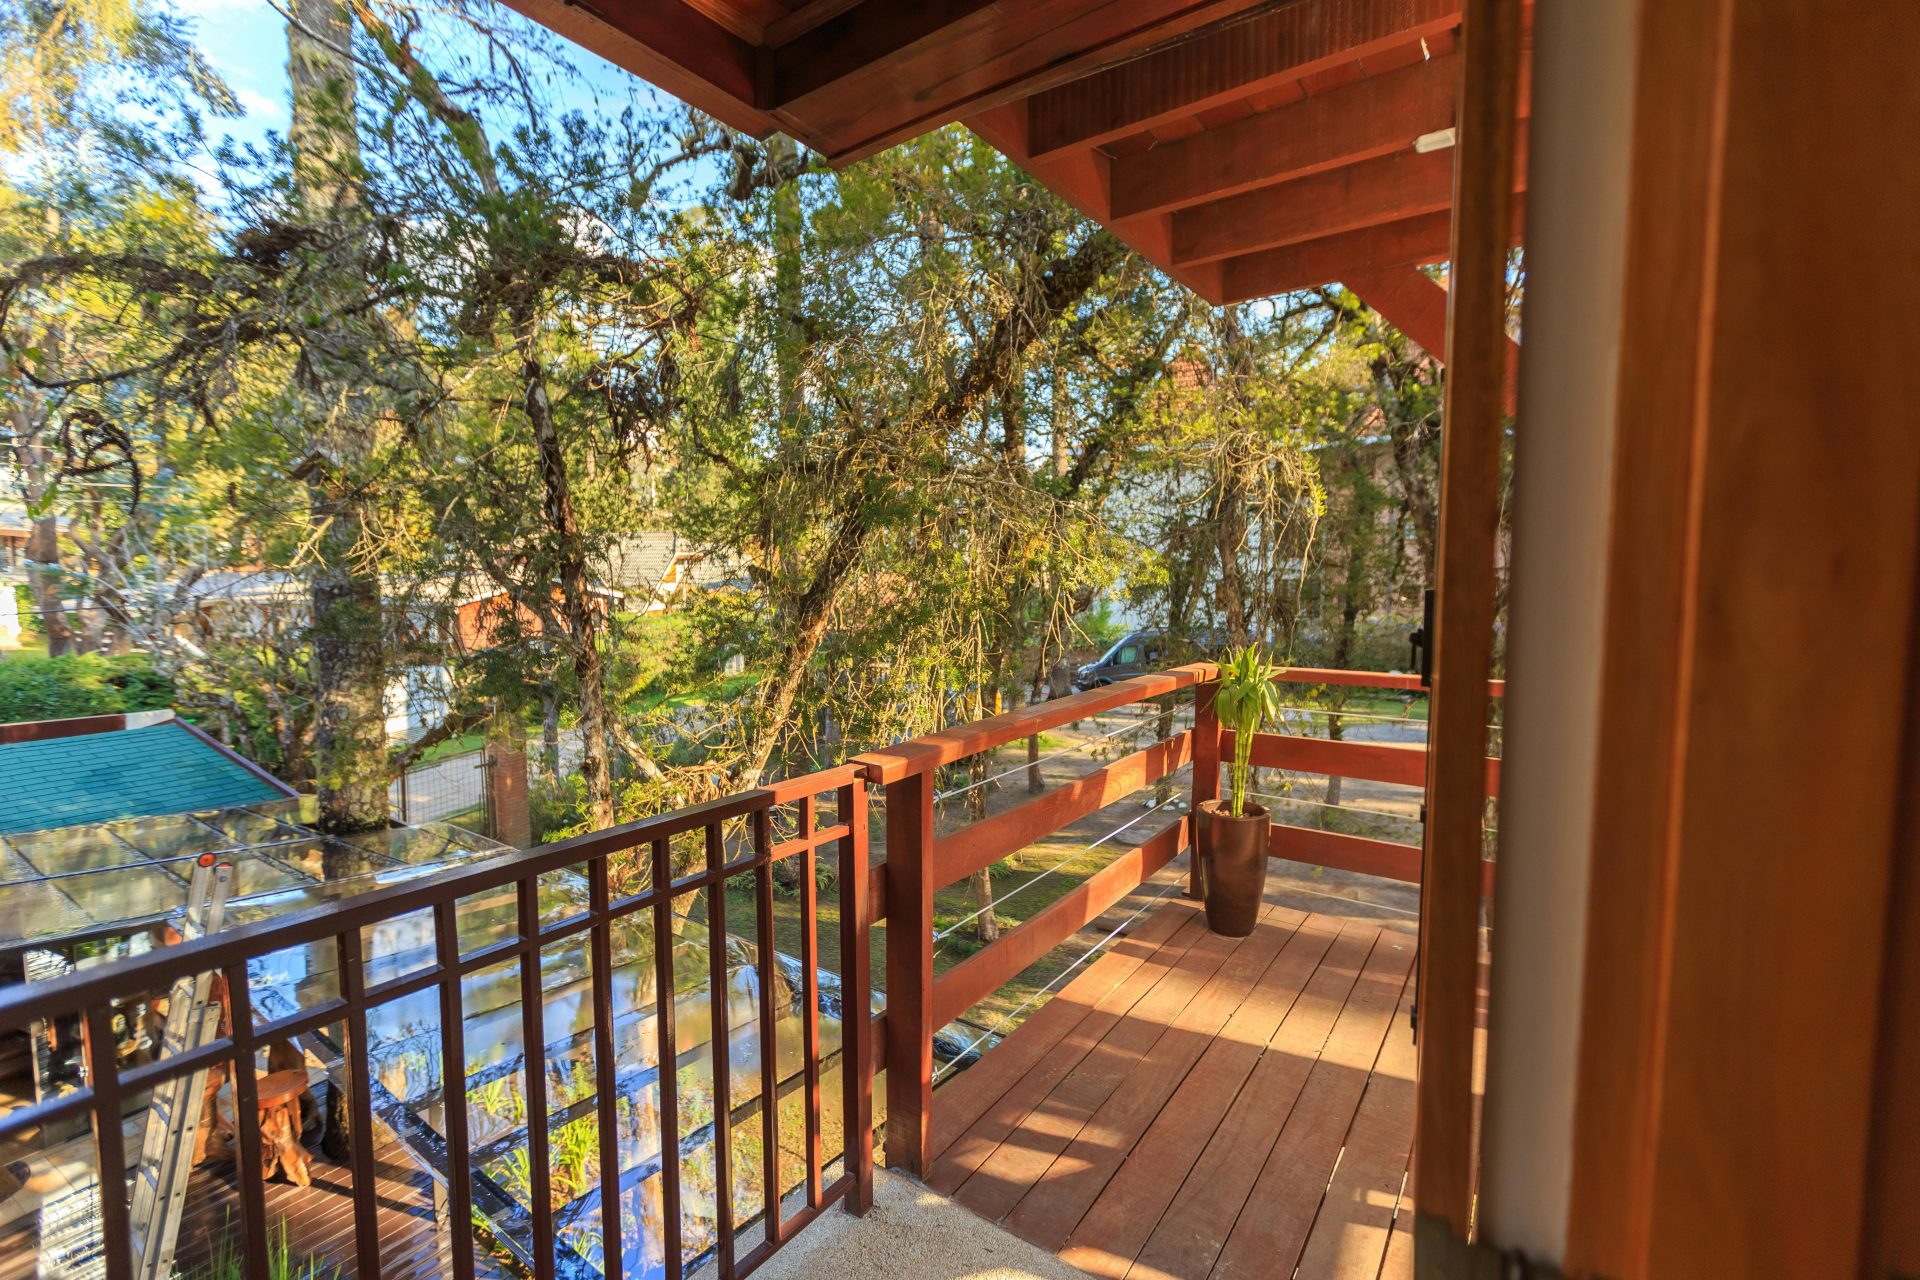 Choosing the Right Wood for Your Deck Railings